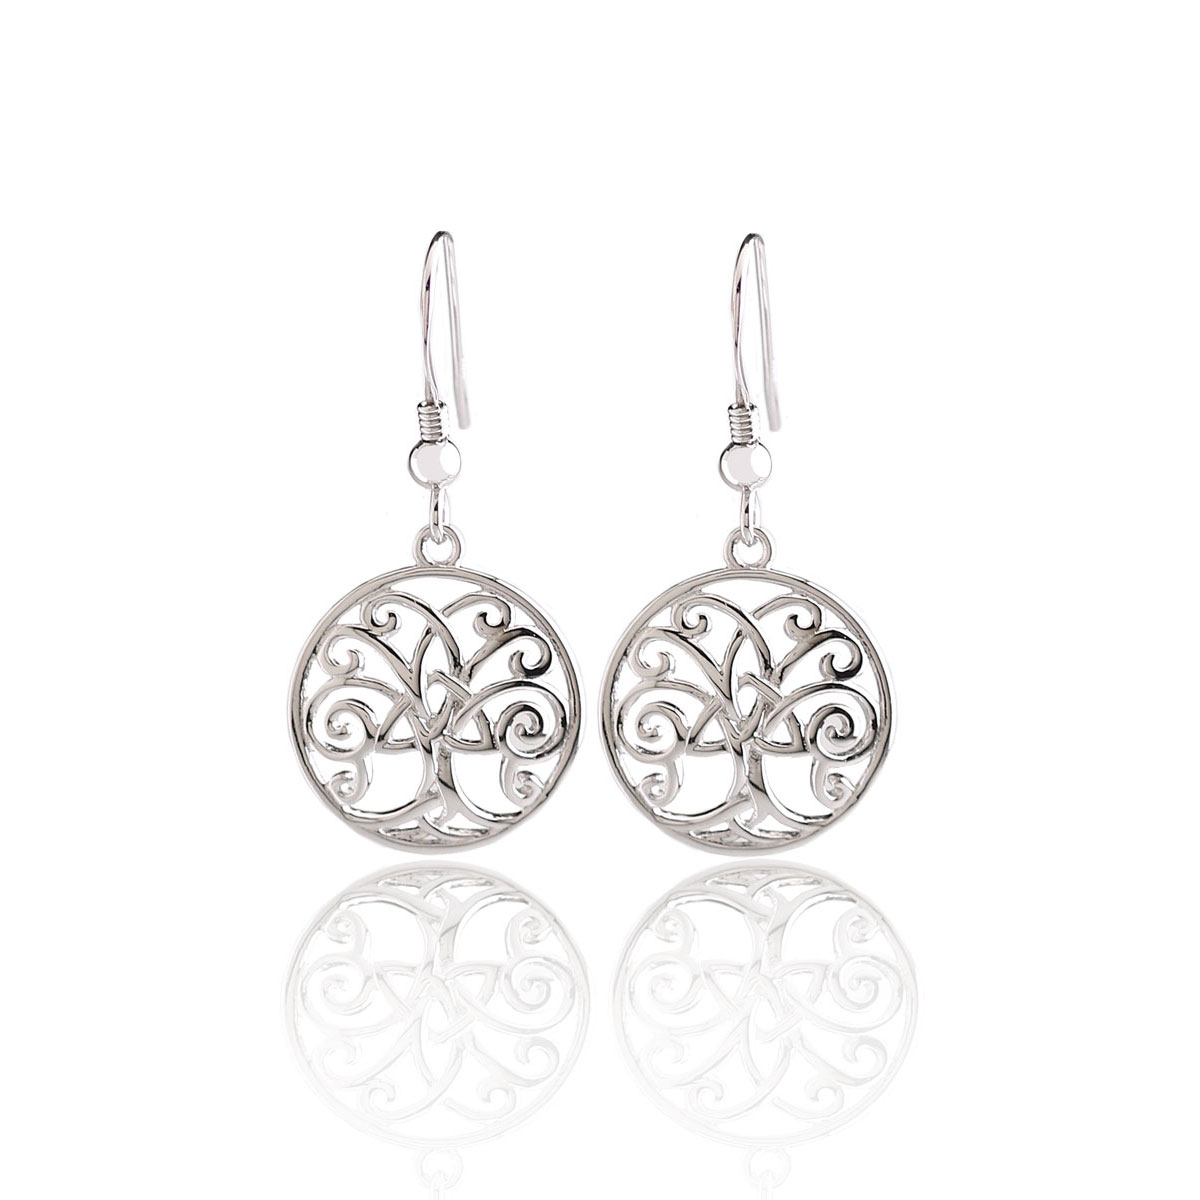 Cashs Ireland, Sterling Silver Tree of Life with Trinity Knot Pierced Earrings, Pair